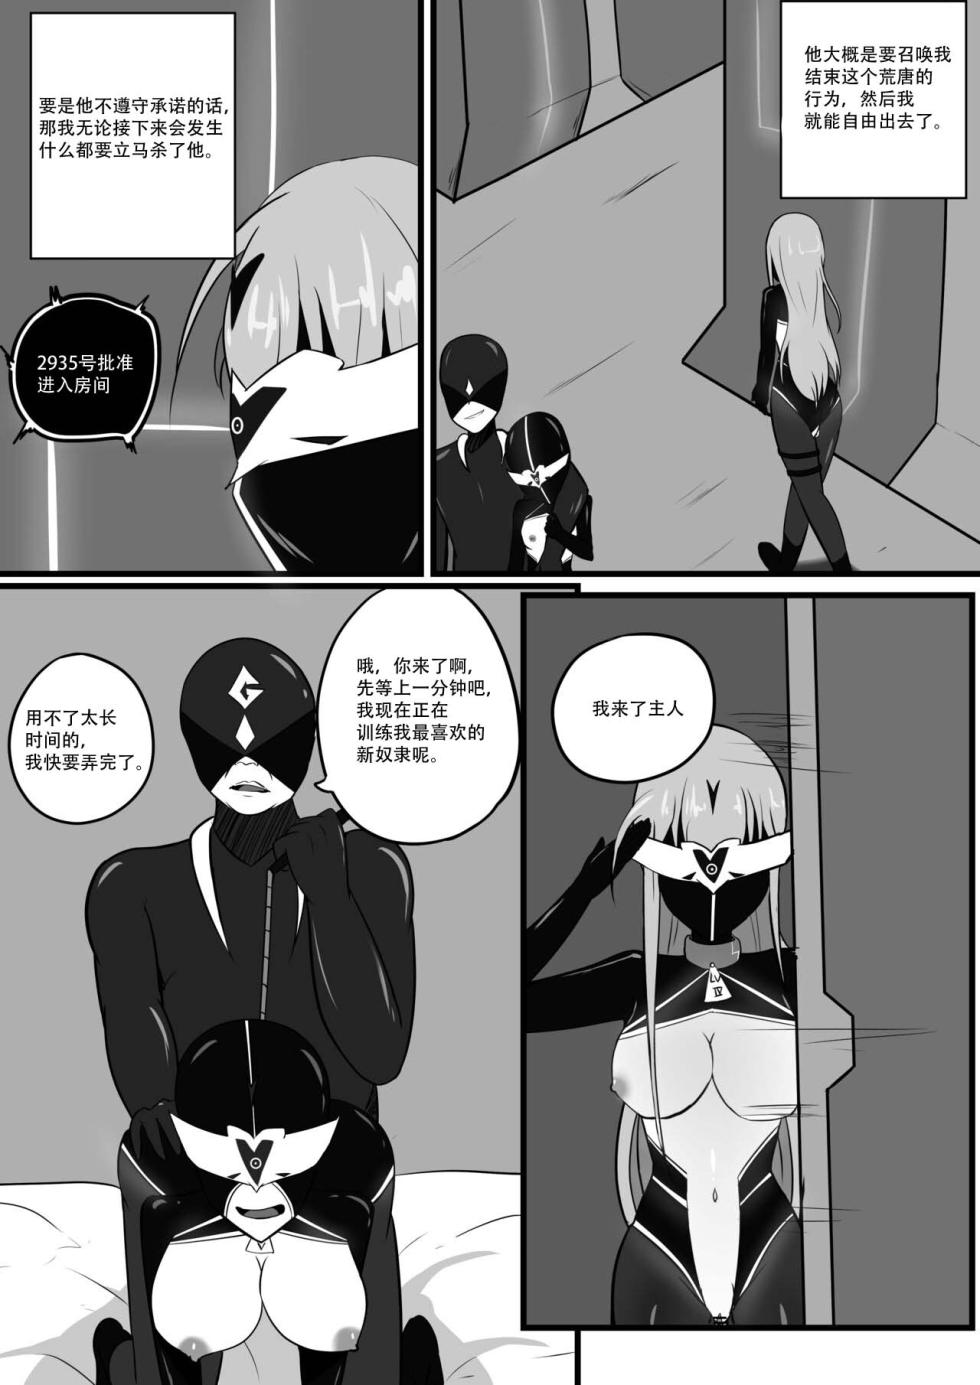 [Aynes] The Degradation of Angels [心海汉化组] - Page 22